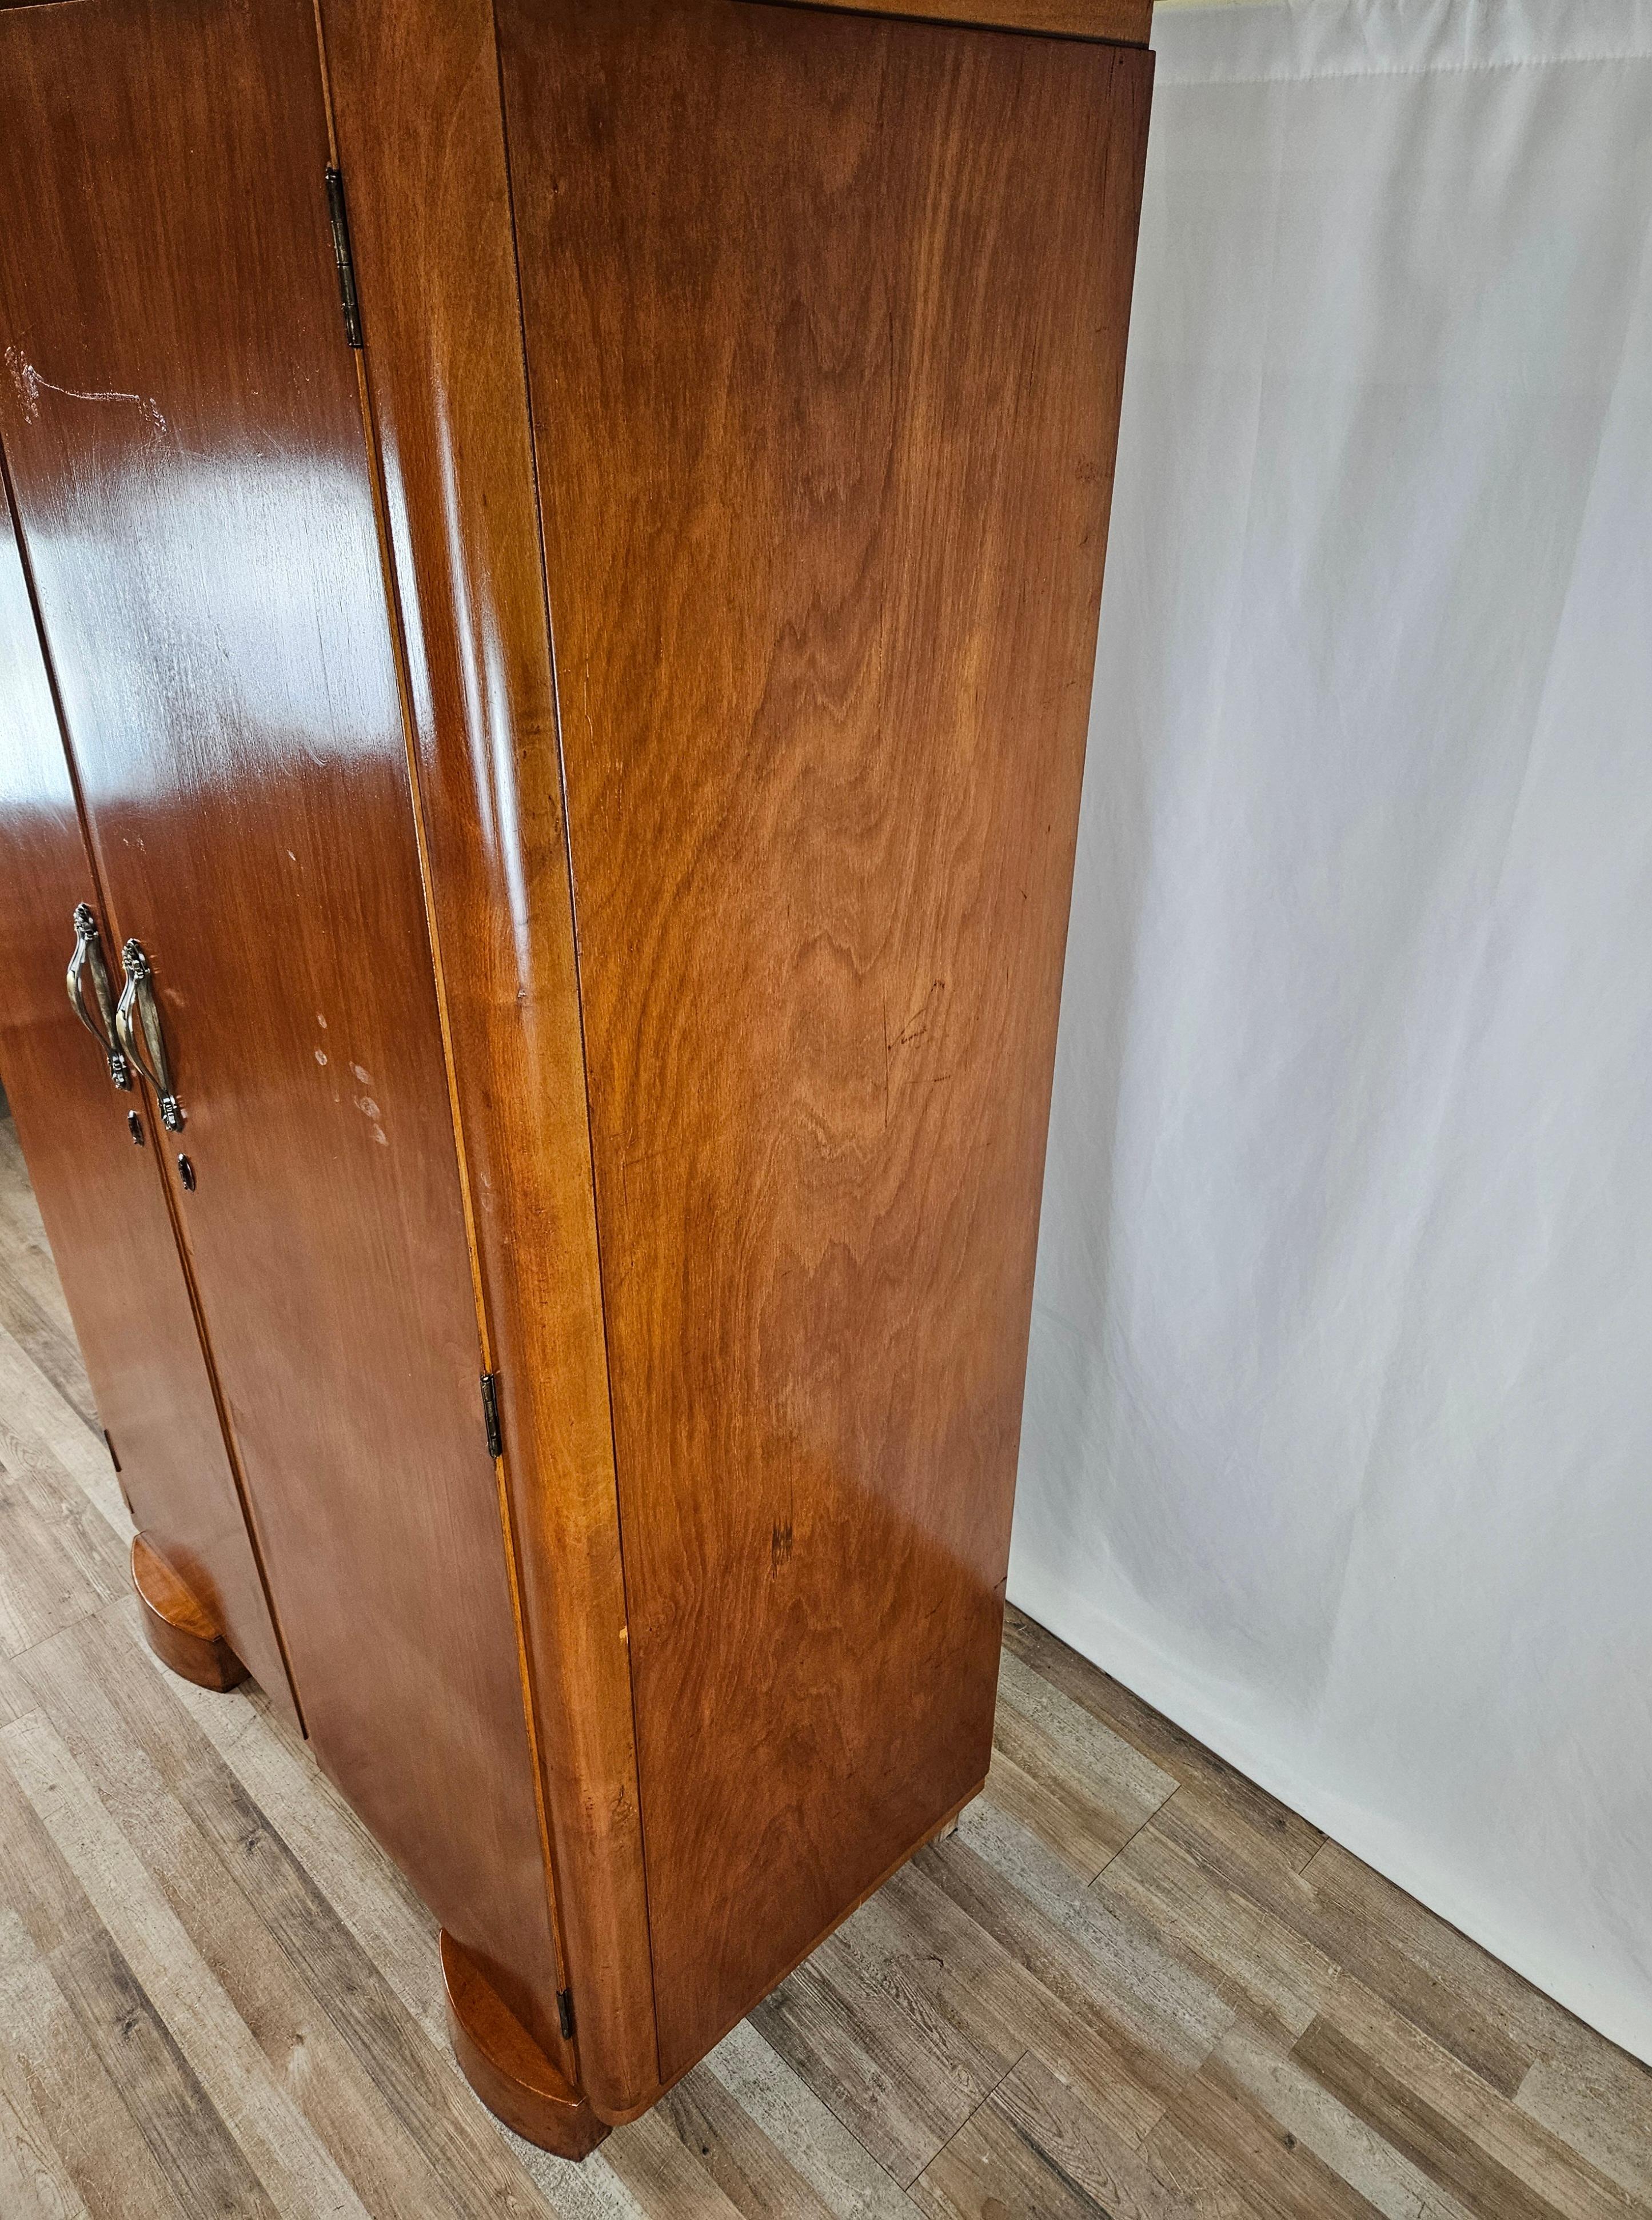 Walnut closet from the early 1940s in Art Deco style of Italian manufacture.

The cabinet has a linear and slightly shaped structure, thanks to the tone of wood is match with any type of modern or antique furniture.

Inside there is a small top